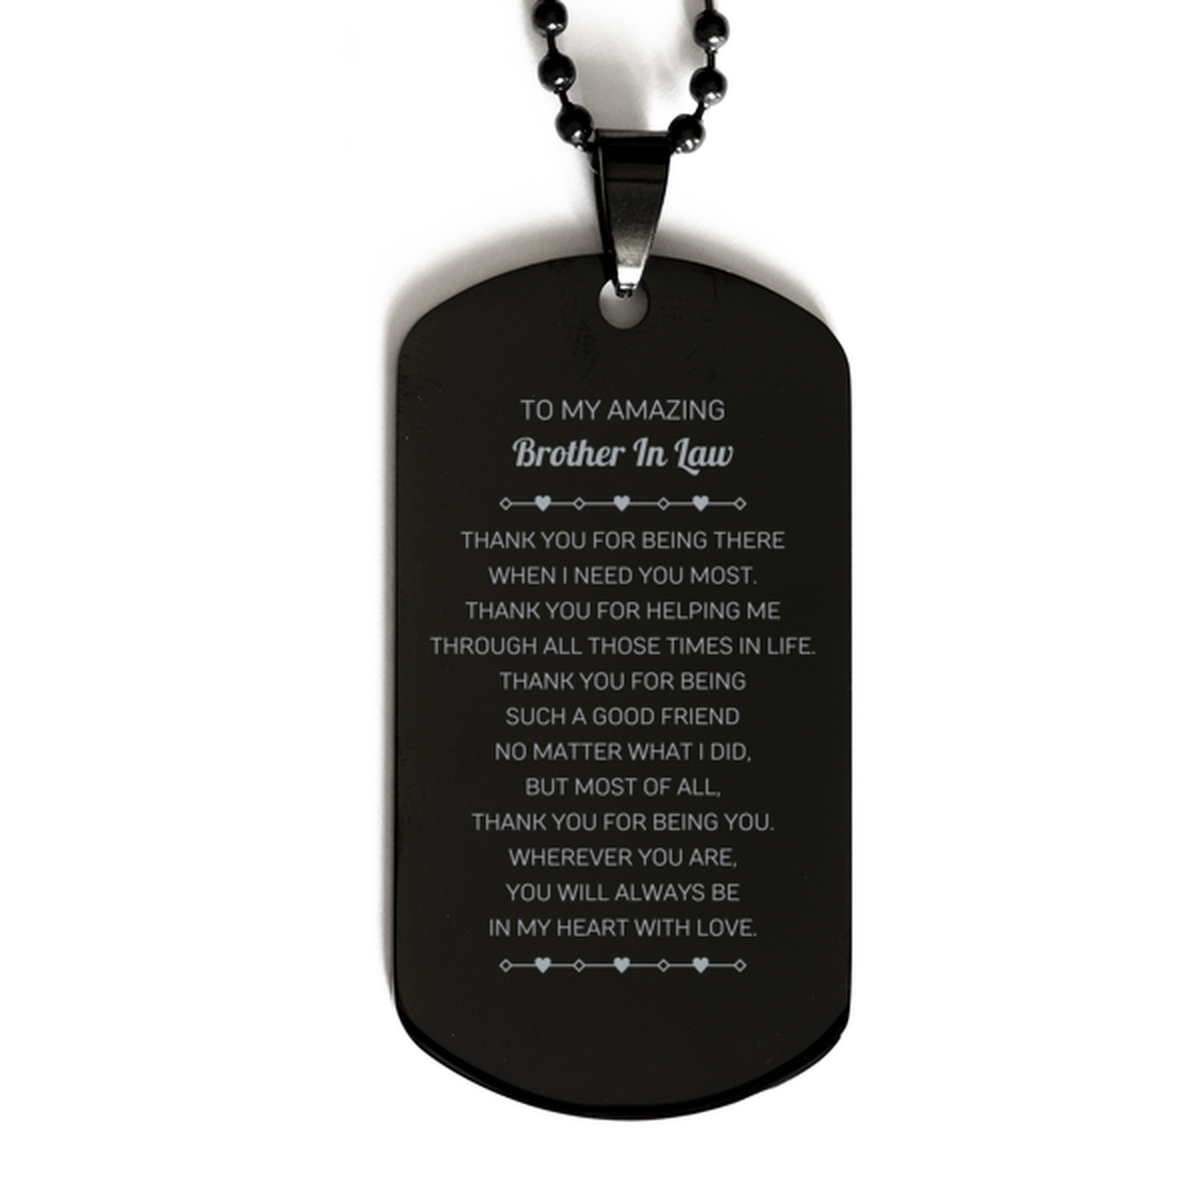 To My Amazing Brother In Law Black Dog Tag, Thank you for being there, Thank You Gifts For Brother In Law, Birthday, Christmas Unique Gifts For Brother In Law